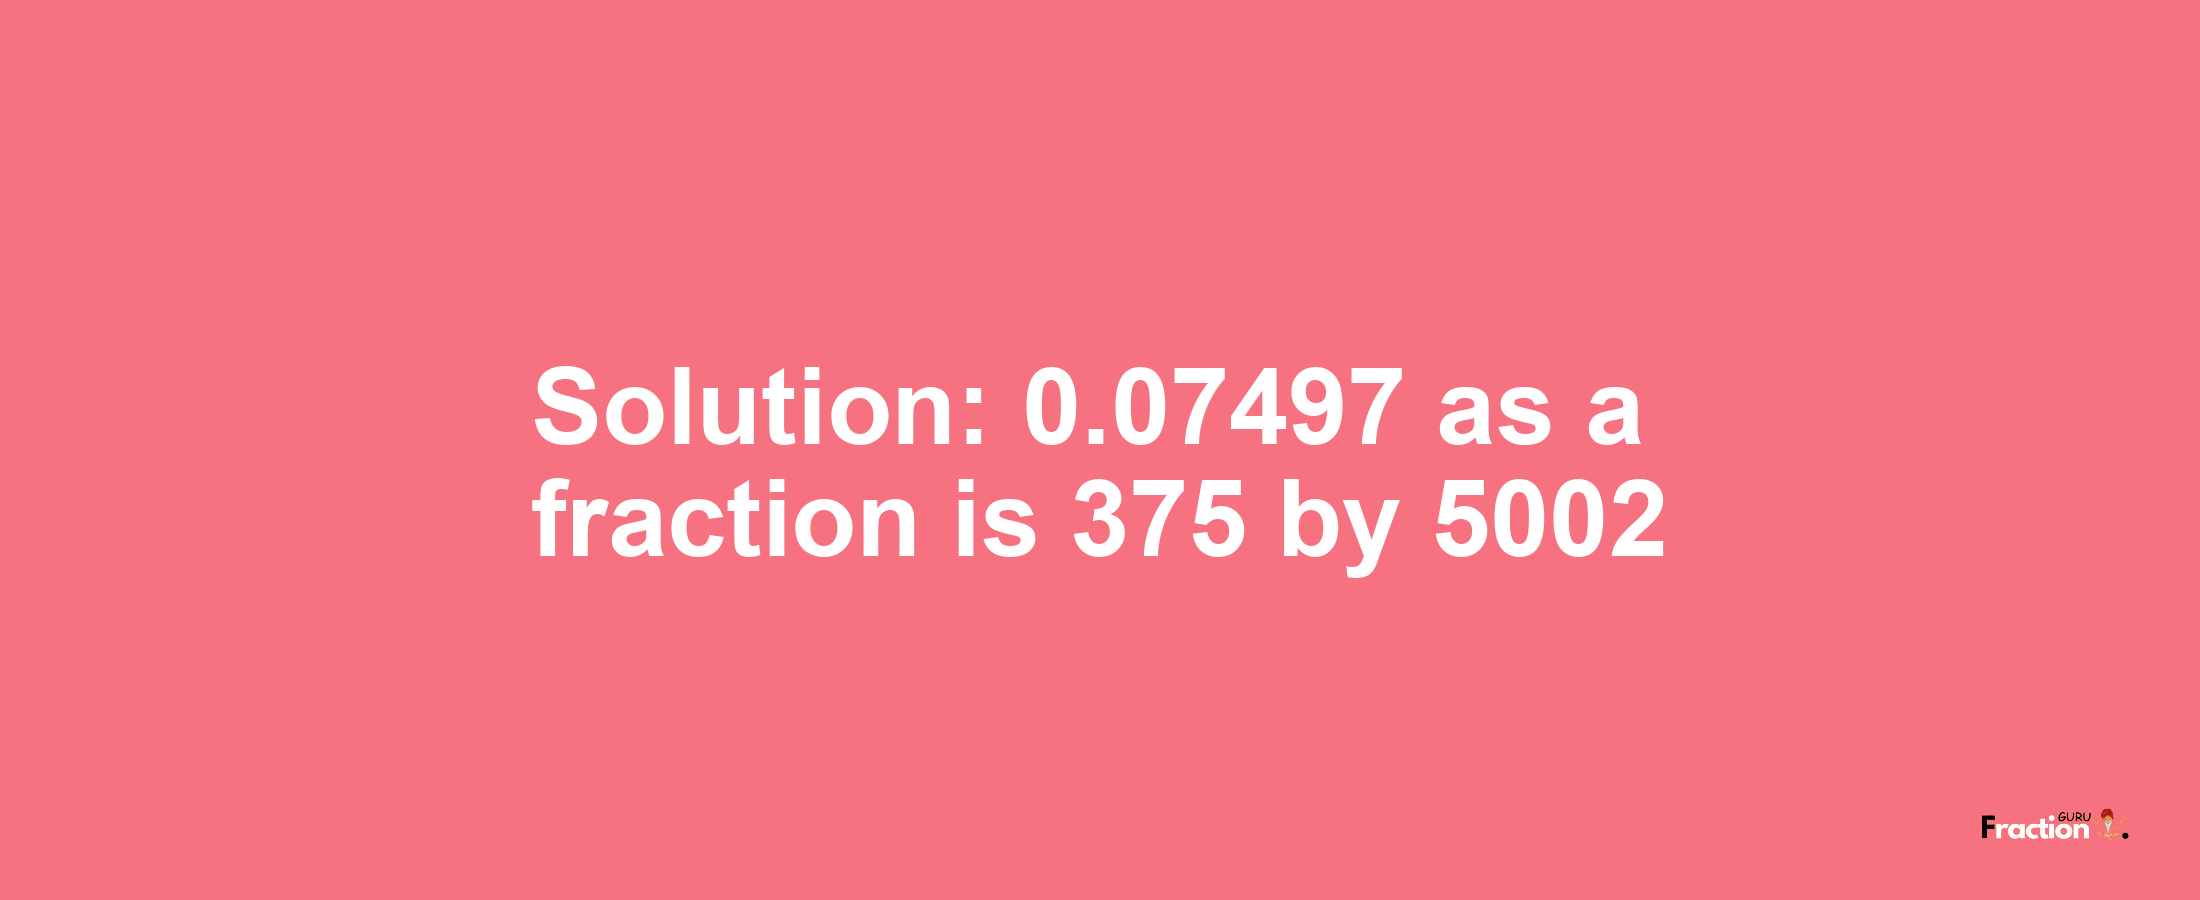 Solution:0.07497 as a fraction is 375/5002